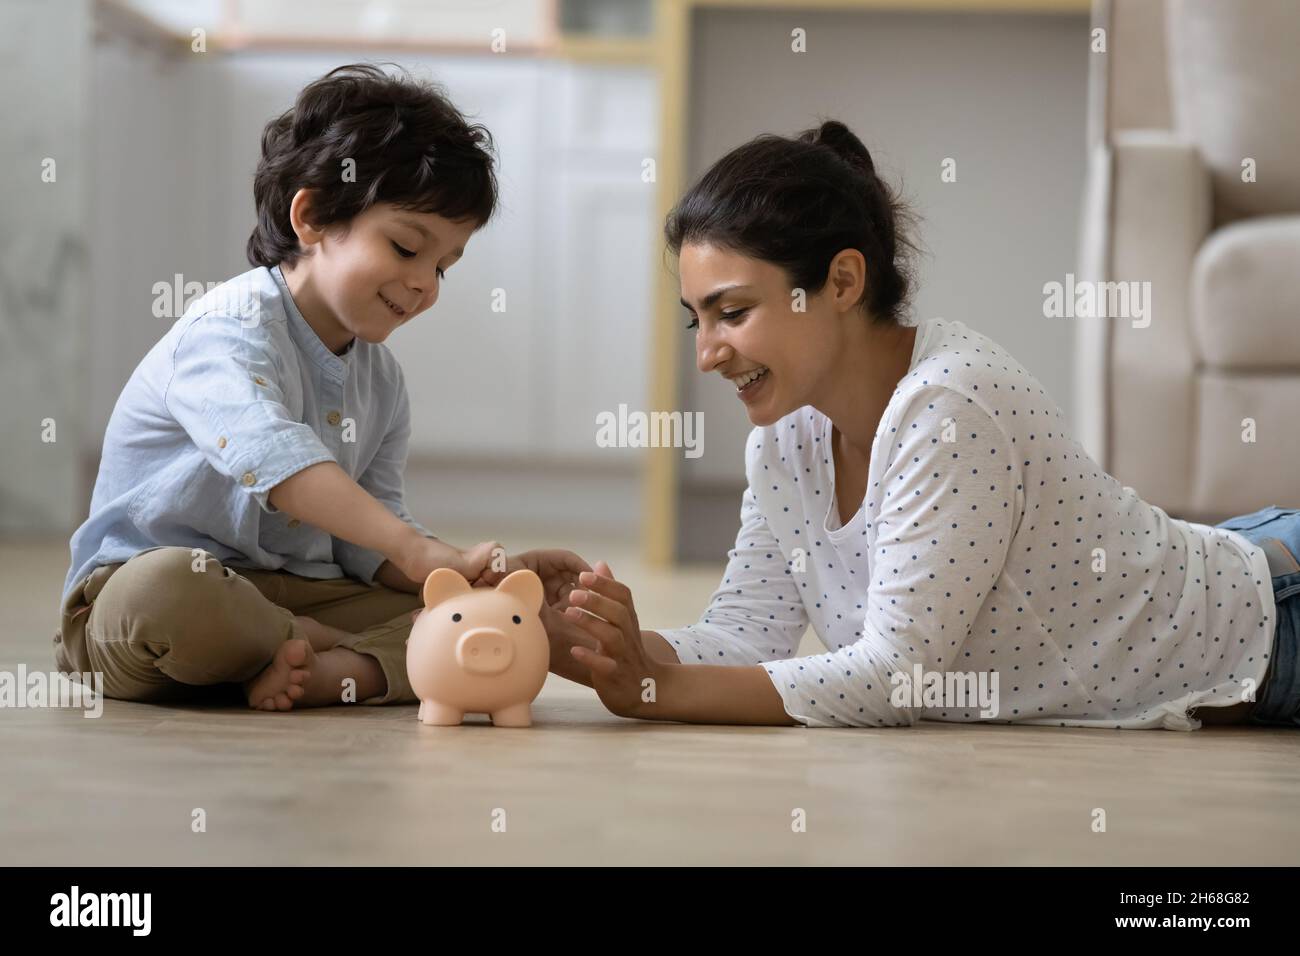 Happy Indian kid and young mom saving money together Stock Photo